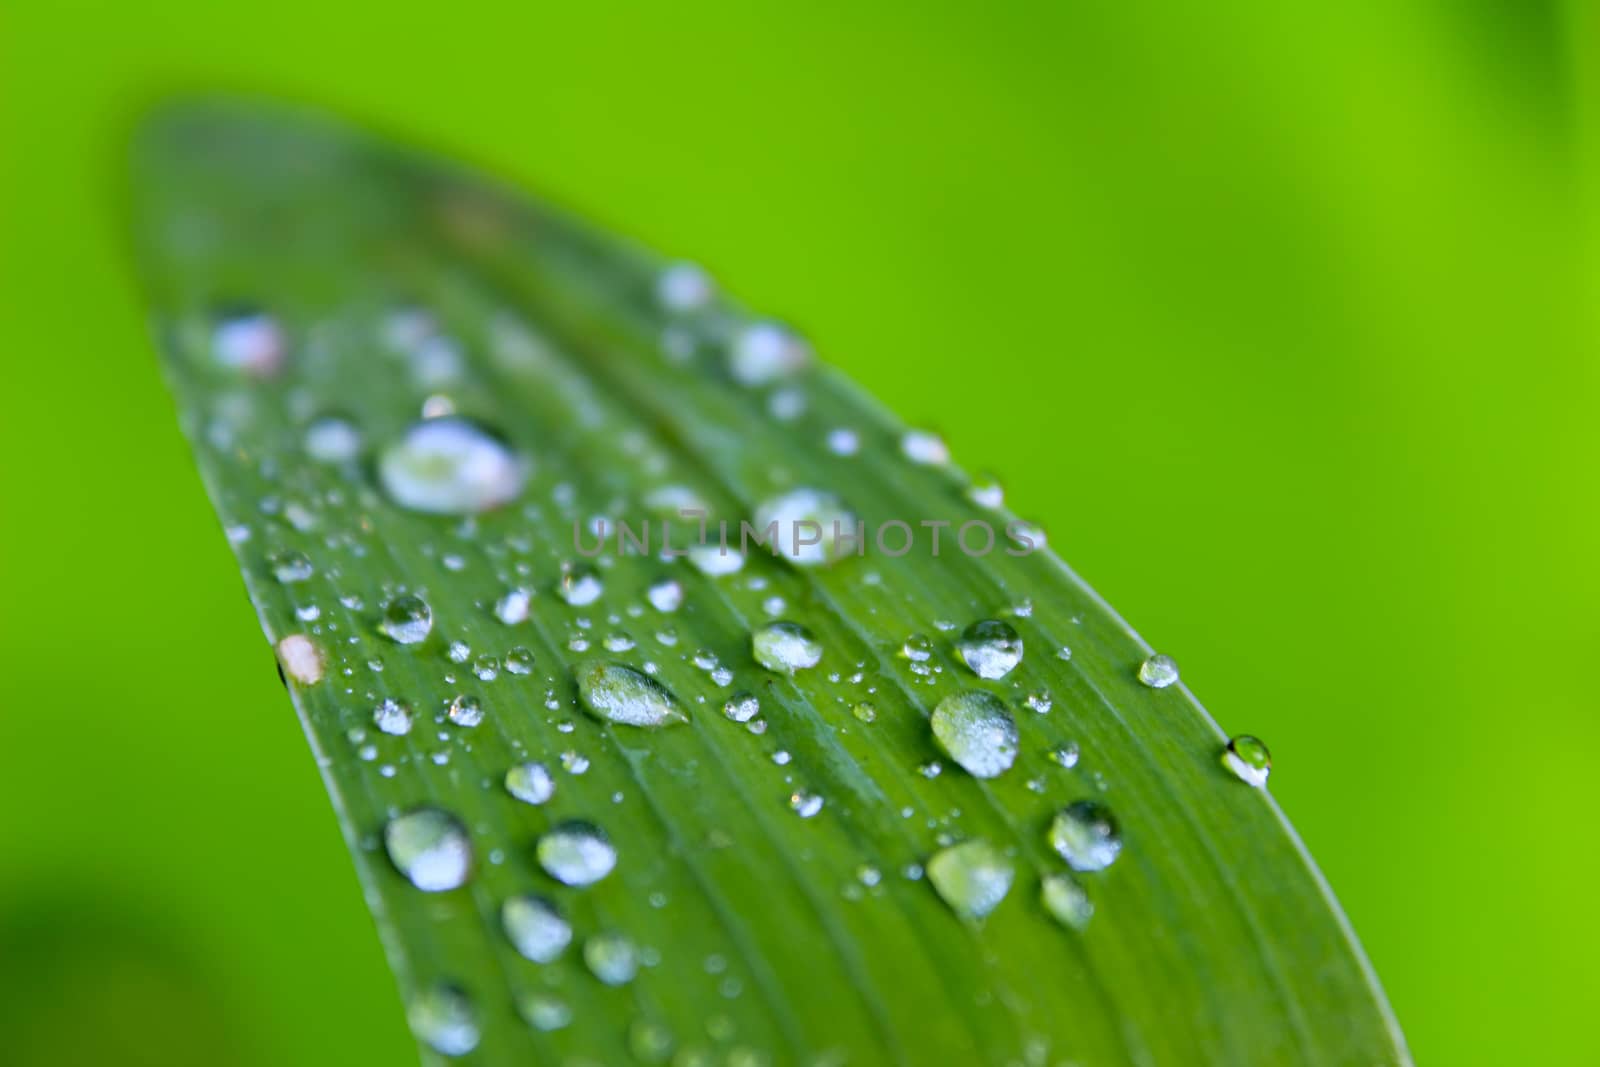 dew drops on leaves by dinhngochung